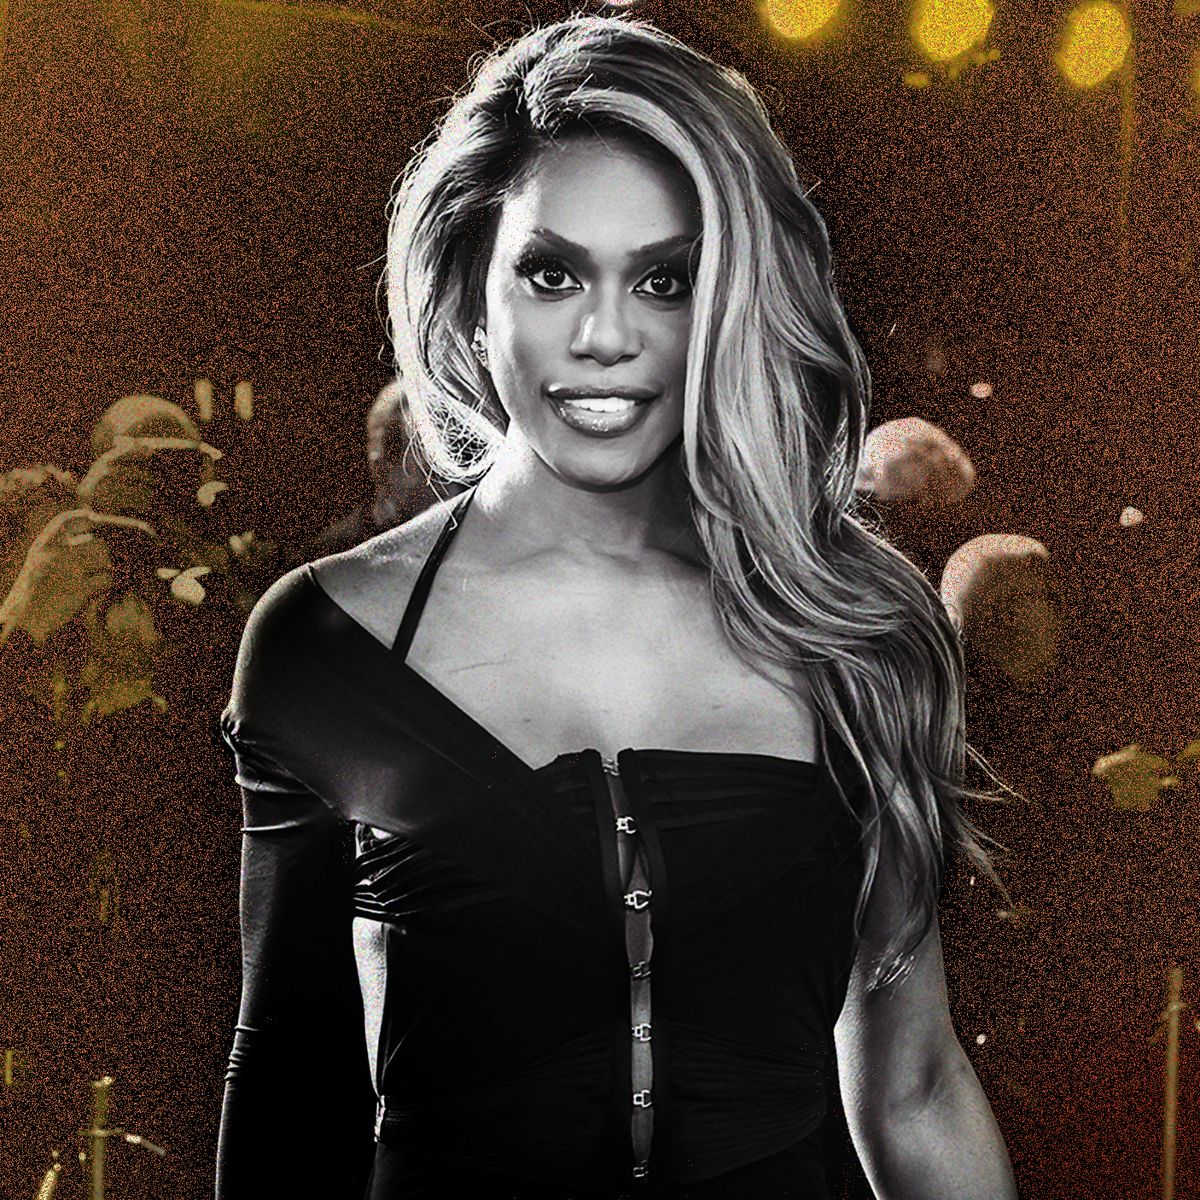 Laverne Cox on Why She Doesn't Want to Have Kids